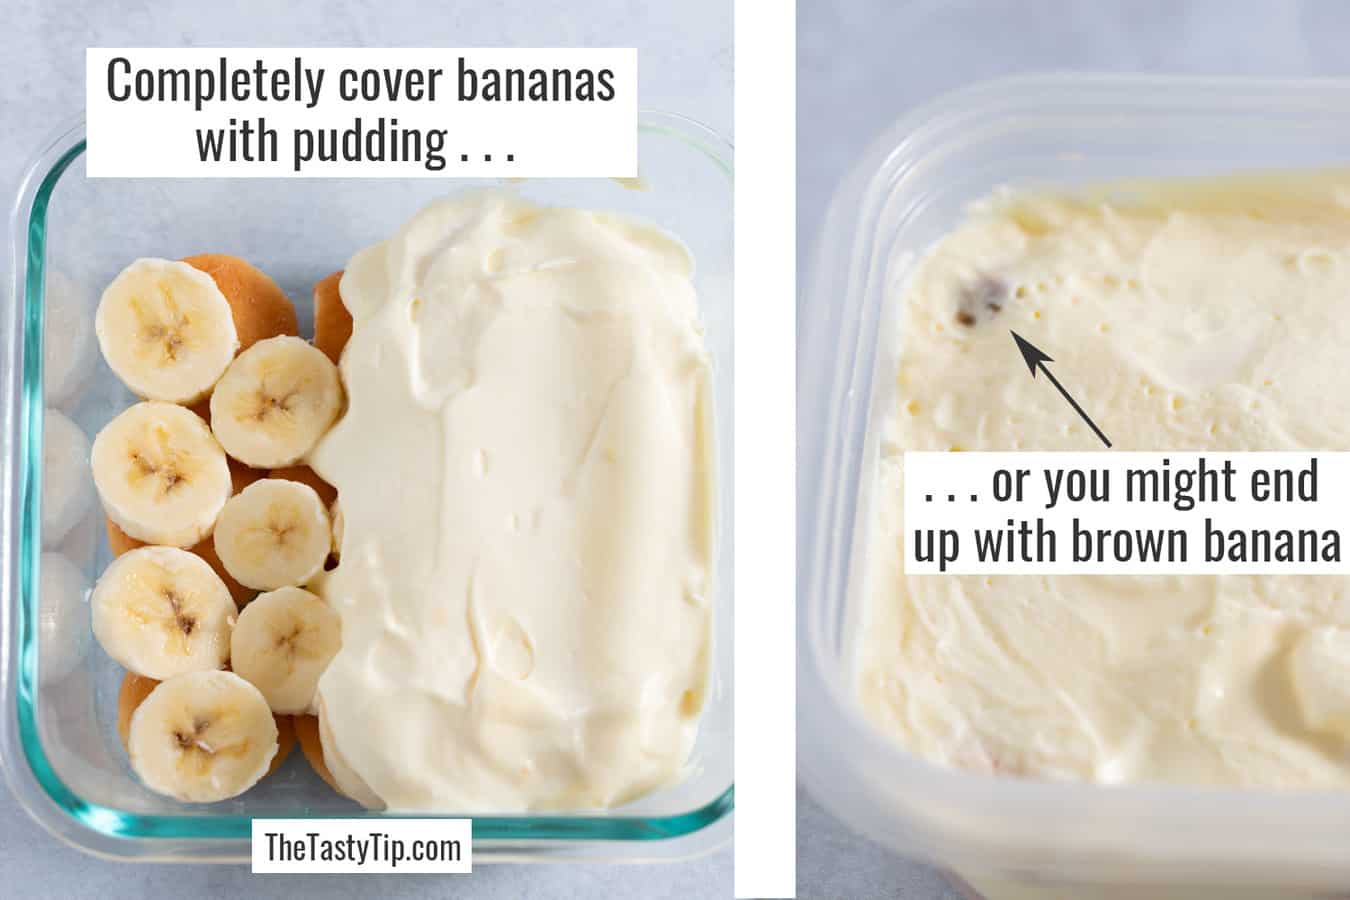 completely covering bananas with pudding